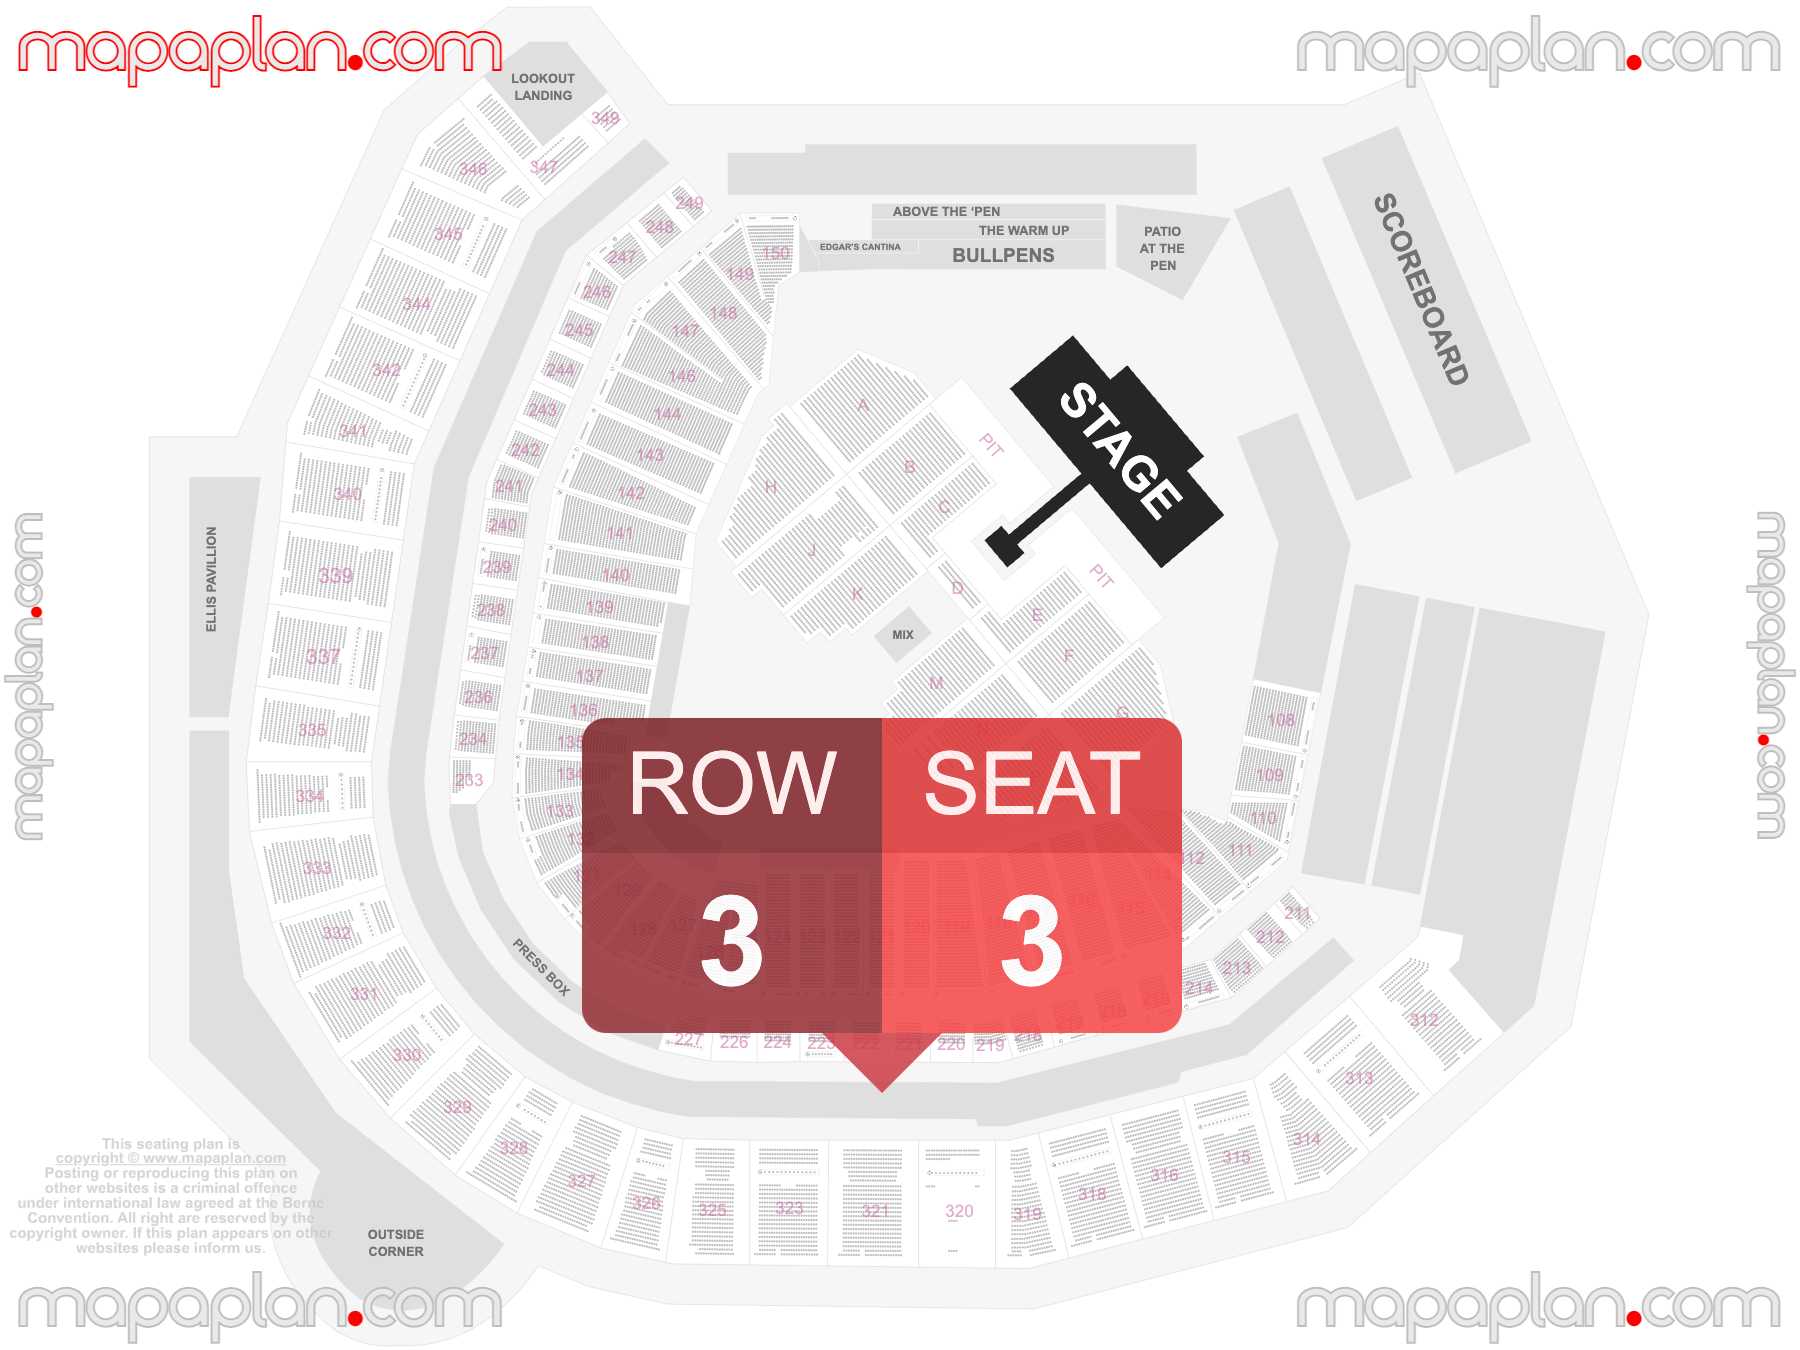 Seattle T-Mobile Park seating chart Concert with extended catwalk runway B-stage and floor PIT general admission standing room only seating chart with exact section numbers showing best rows and seats selection 3d layout - Best interactive seat finder tool with precise detailed location data